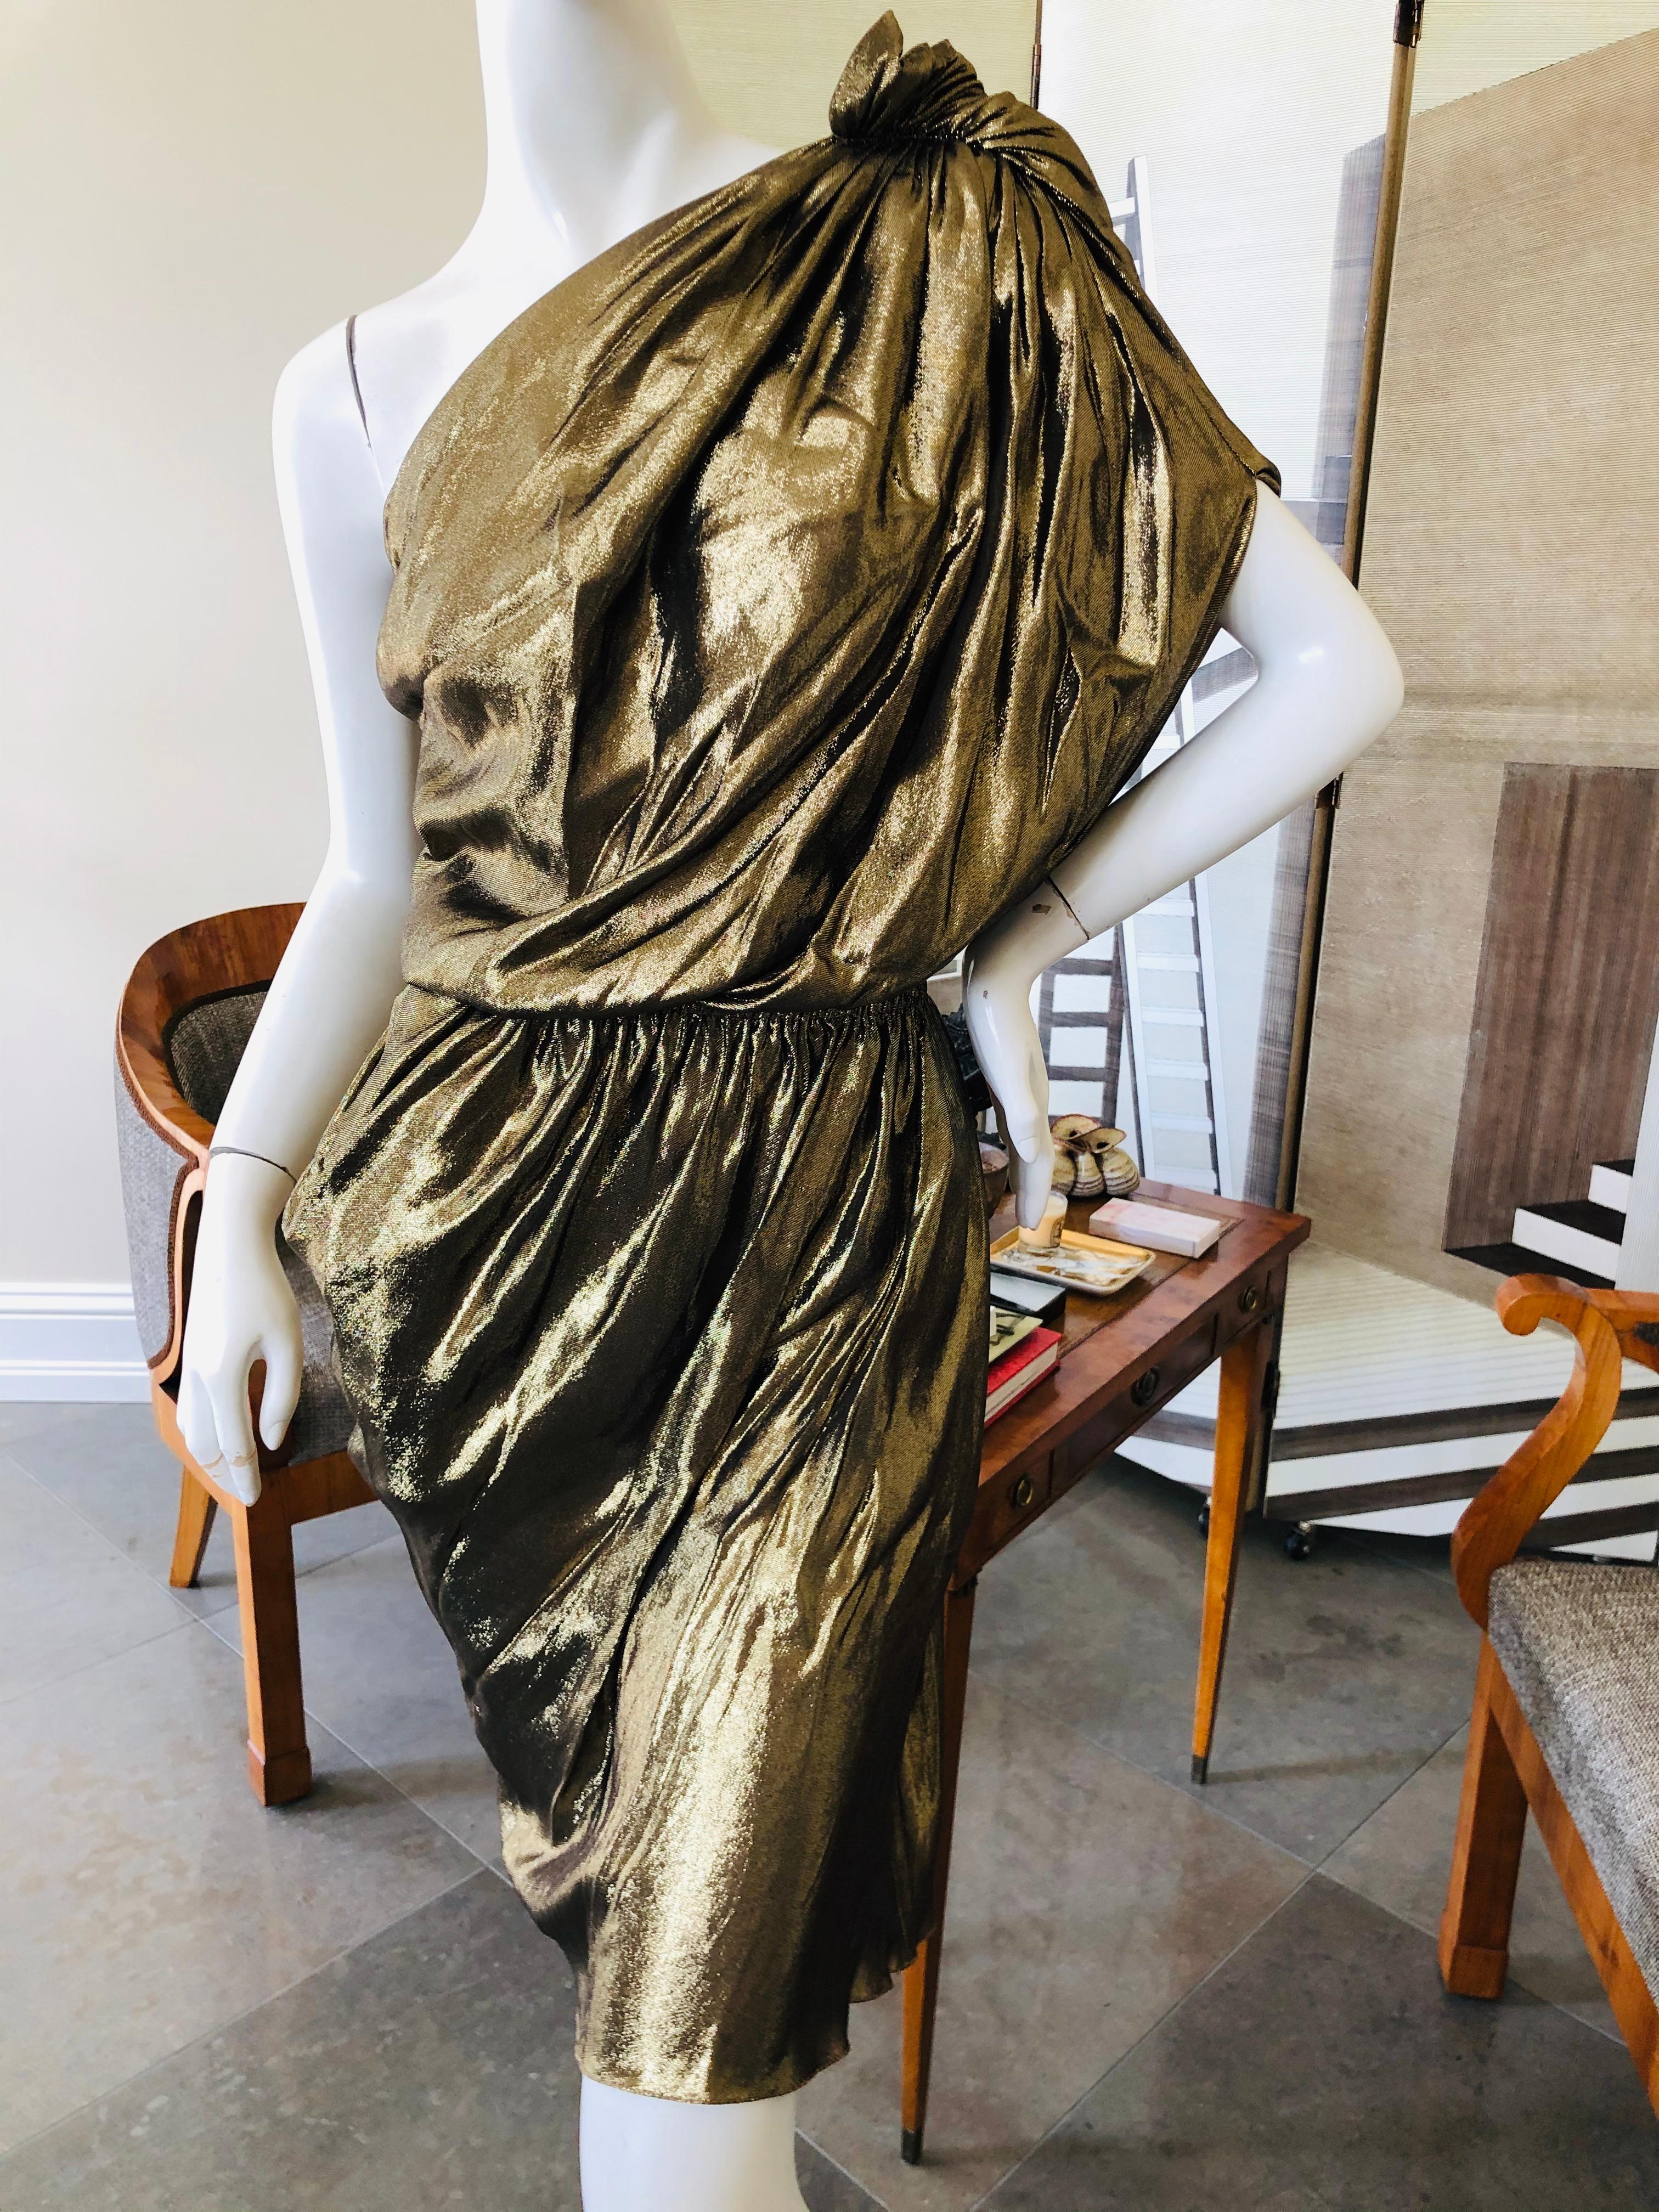 Lanvin by Alber Elbaz Metallic Gold Goddess Dress Fall 2010
So beautiful, much prettier in person.
This is exquisite.
Size 38
Bust 36